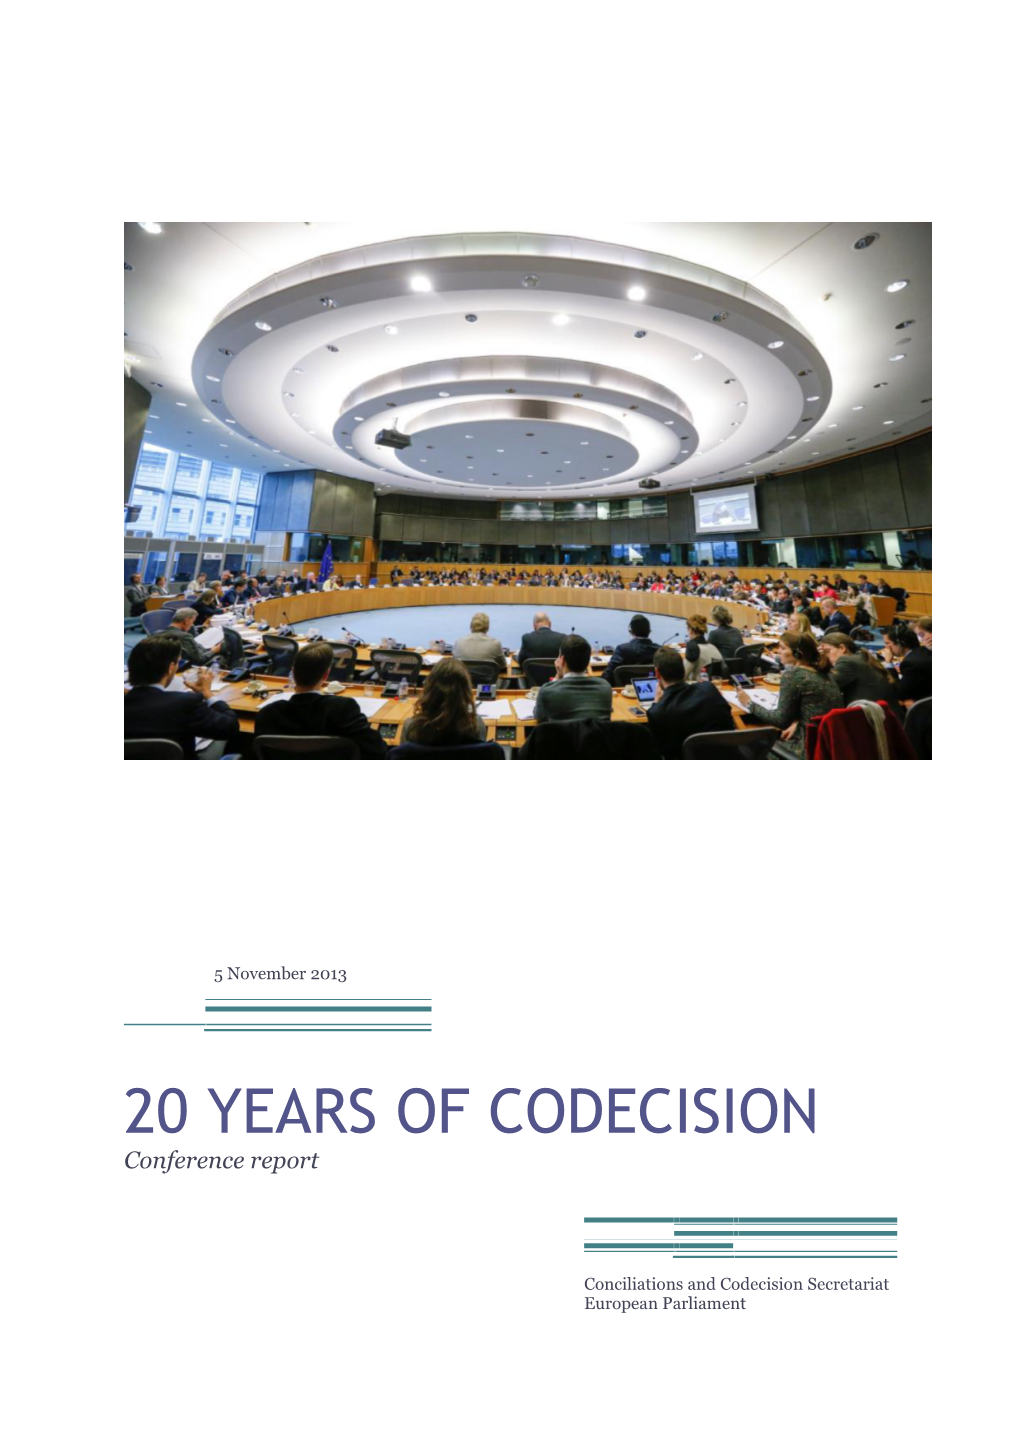 Report of the Conference "20 Years of Codecision"